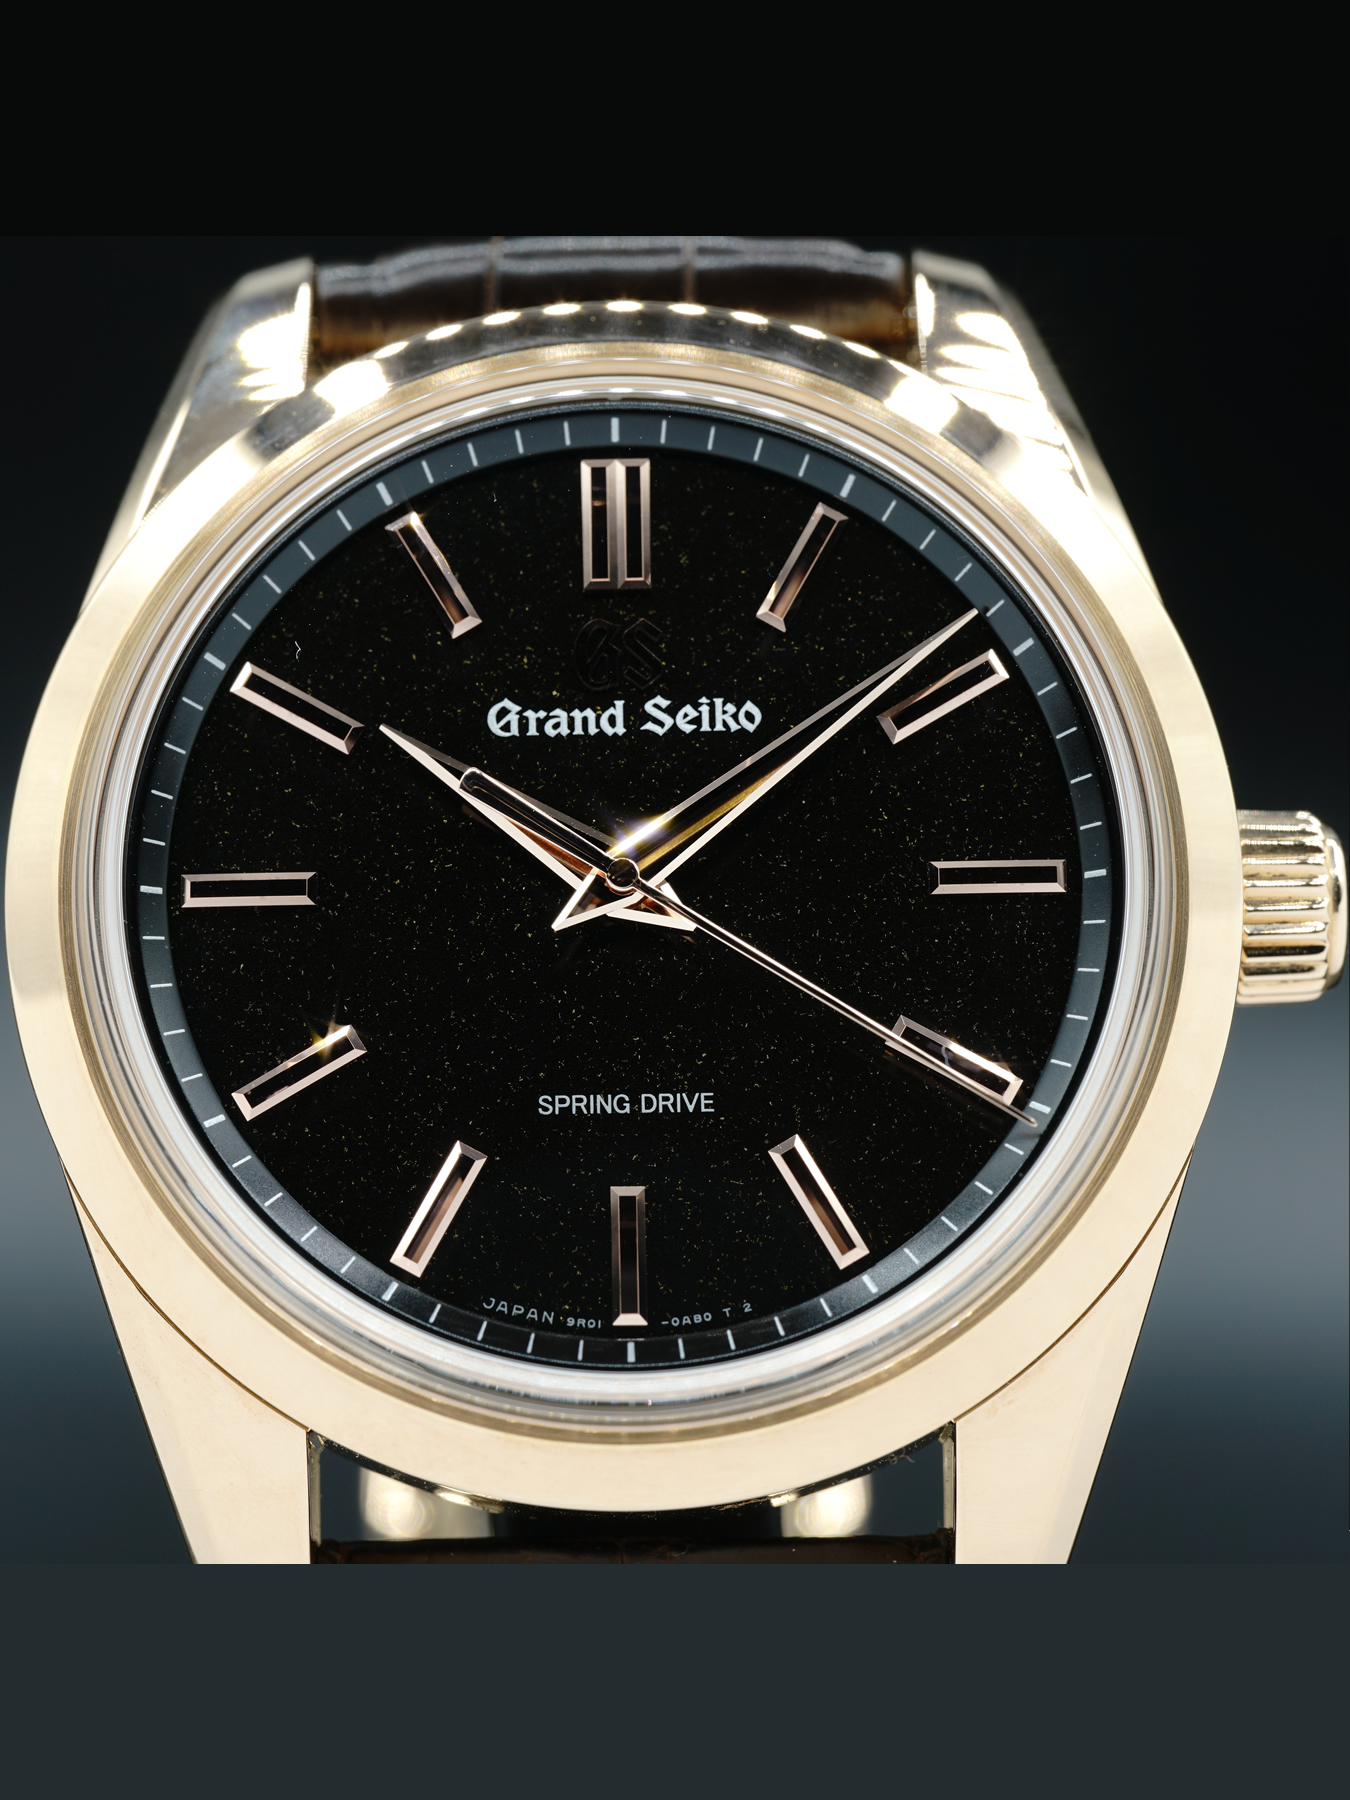 Grand Seiko Spring Drive SBGD202 - Exquisite Timepieces